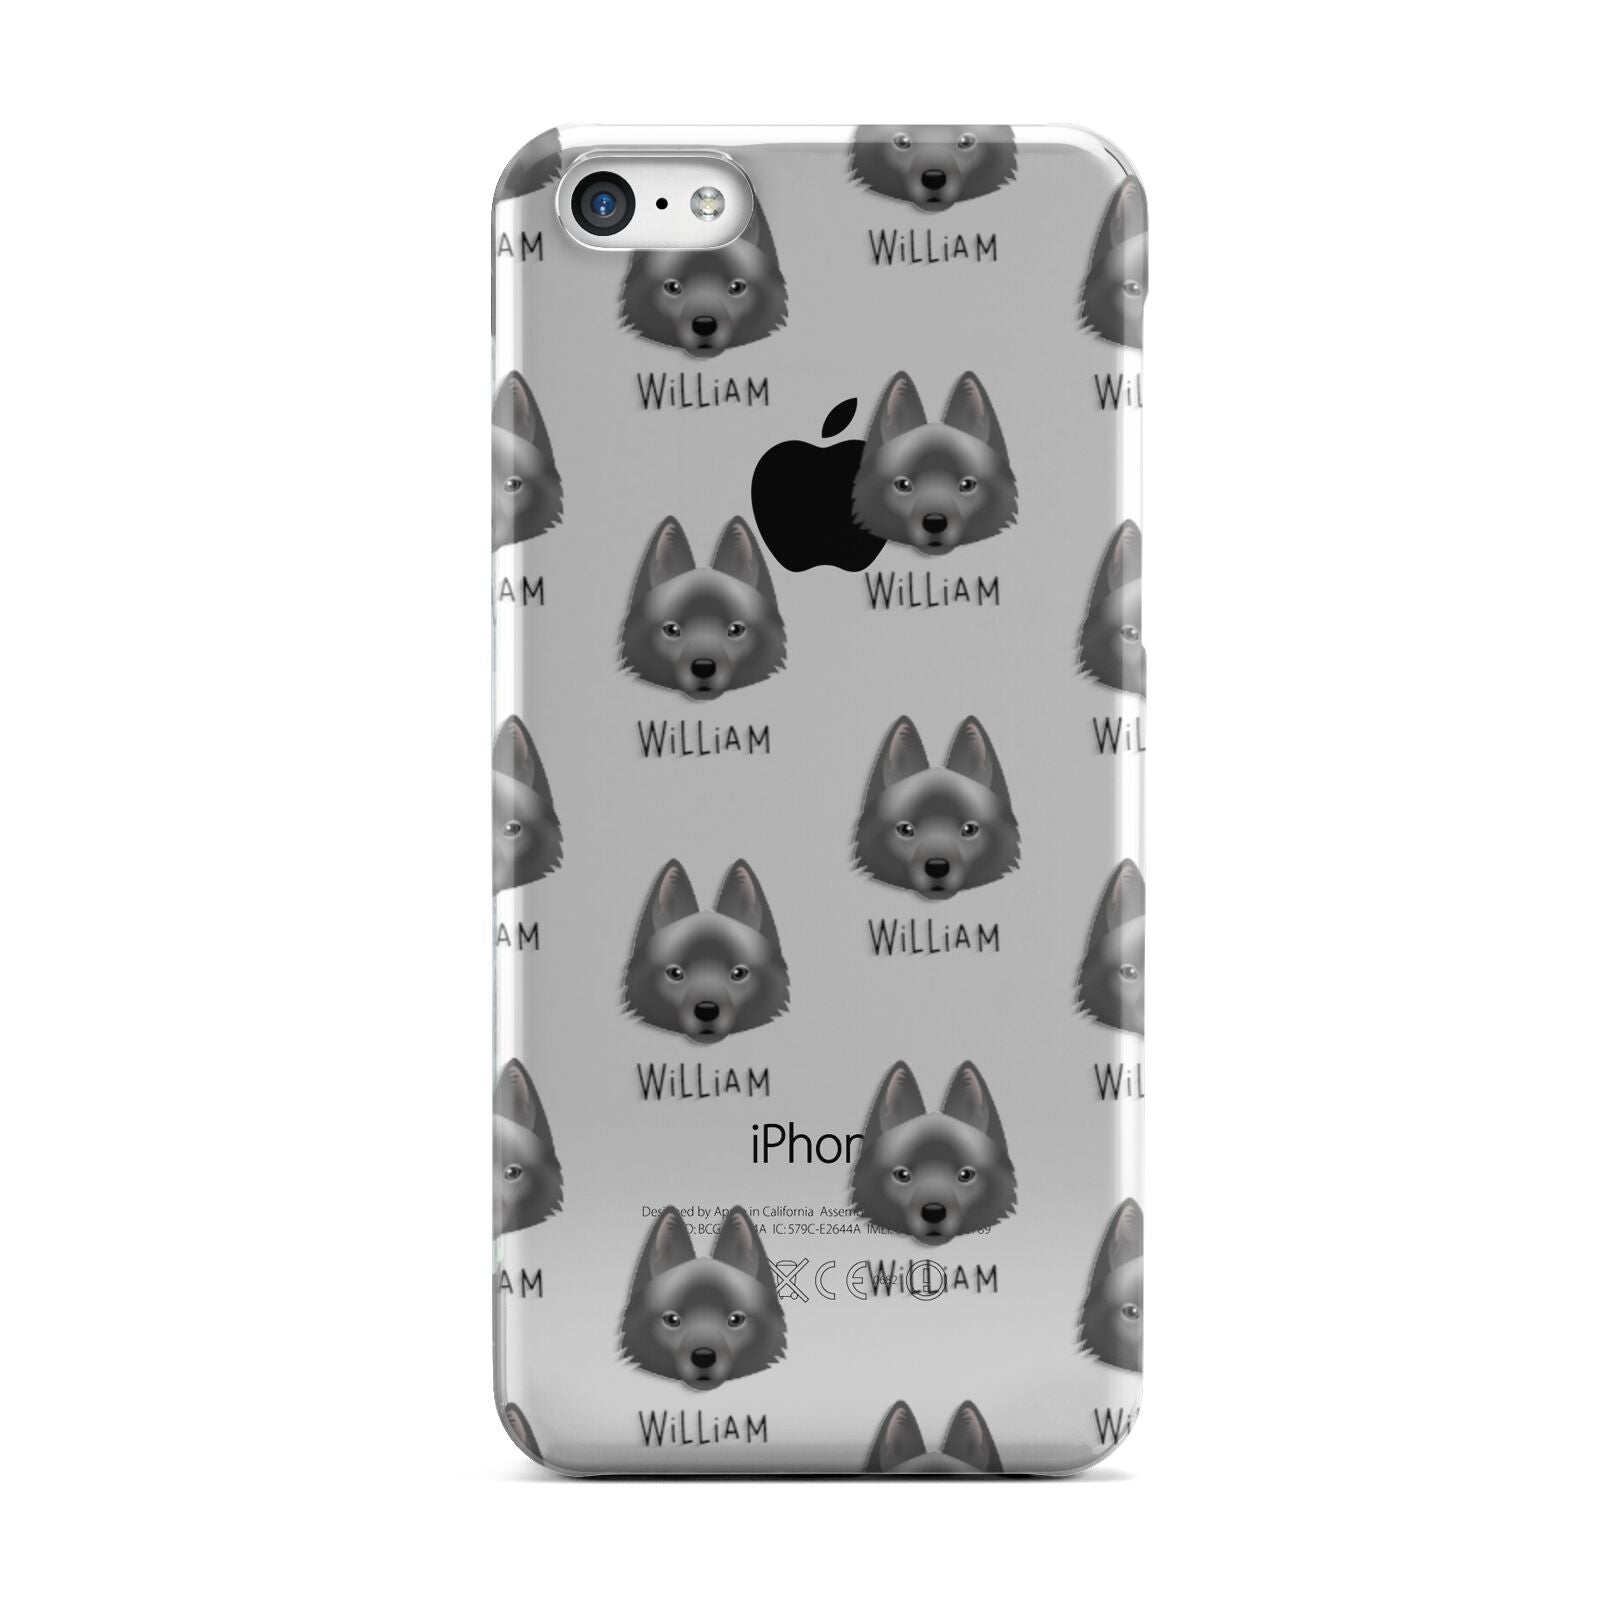 Schipperke Icon with Name Apple iPhone 5c Case